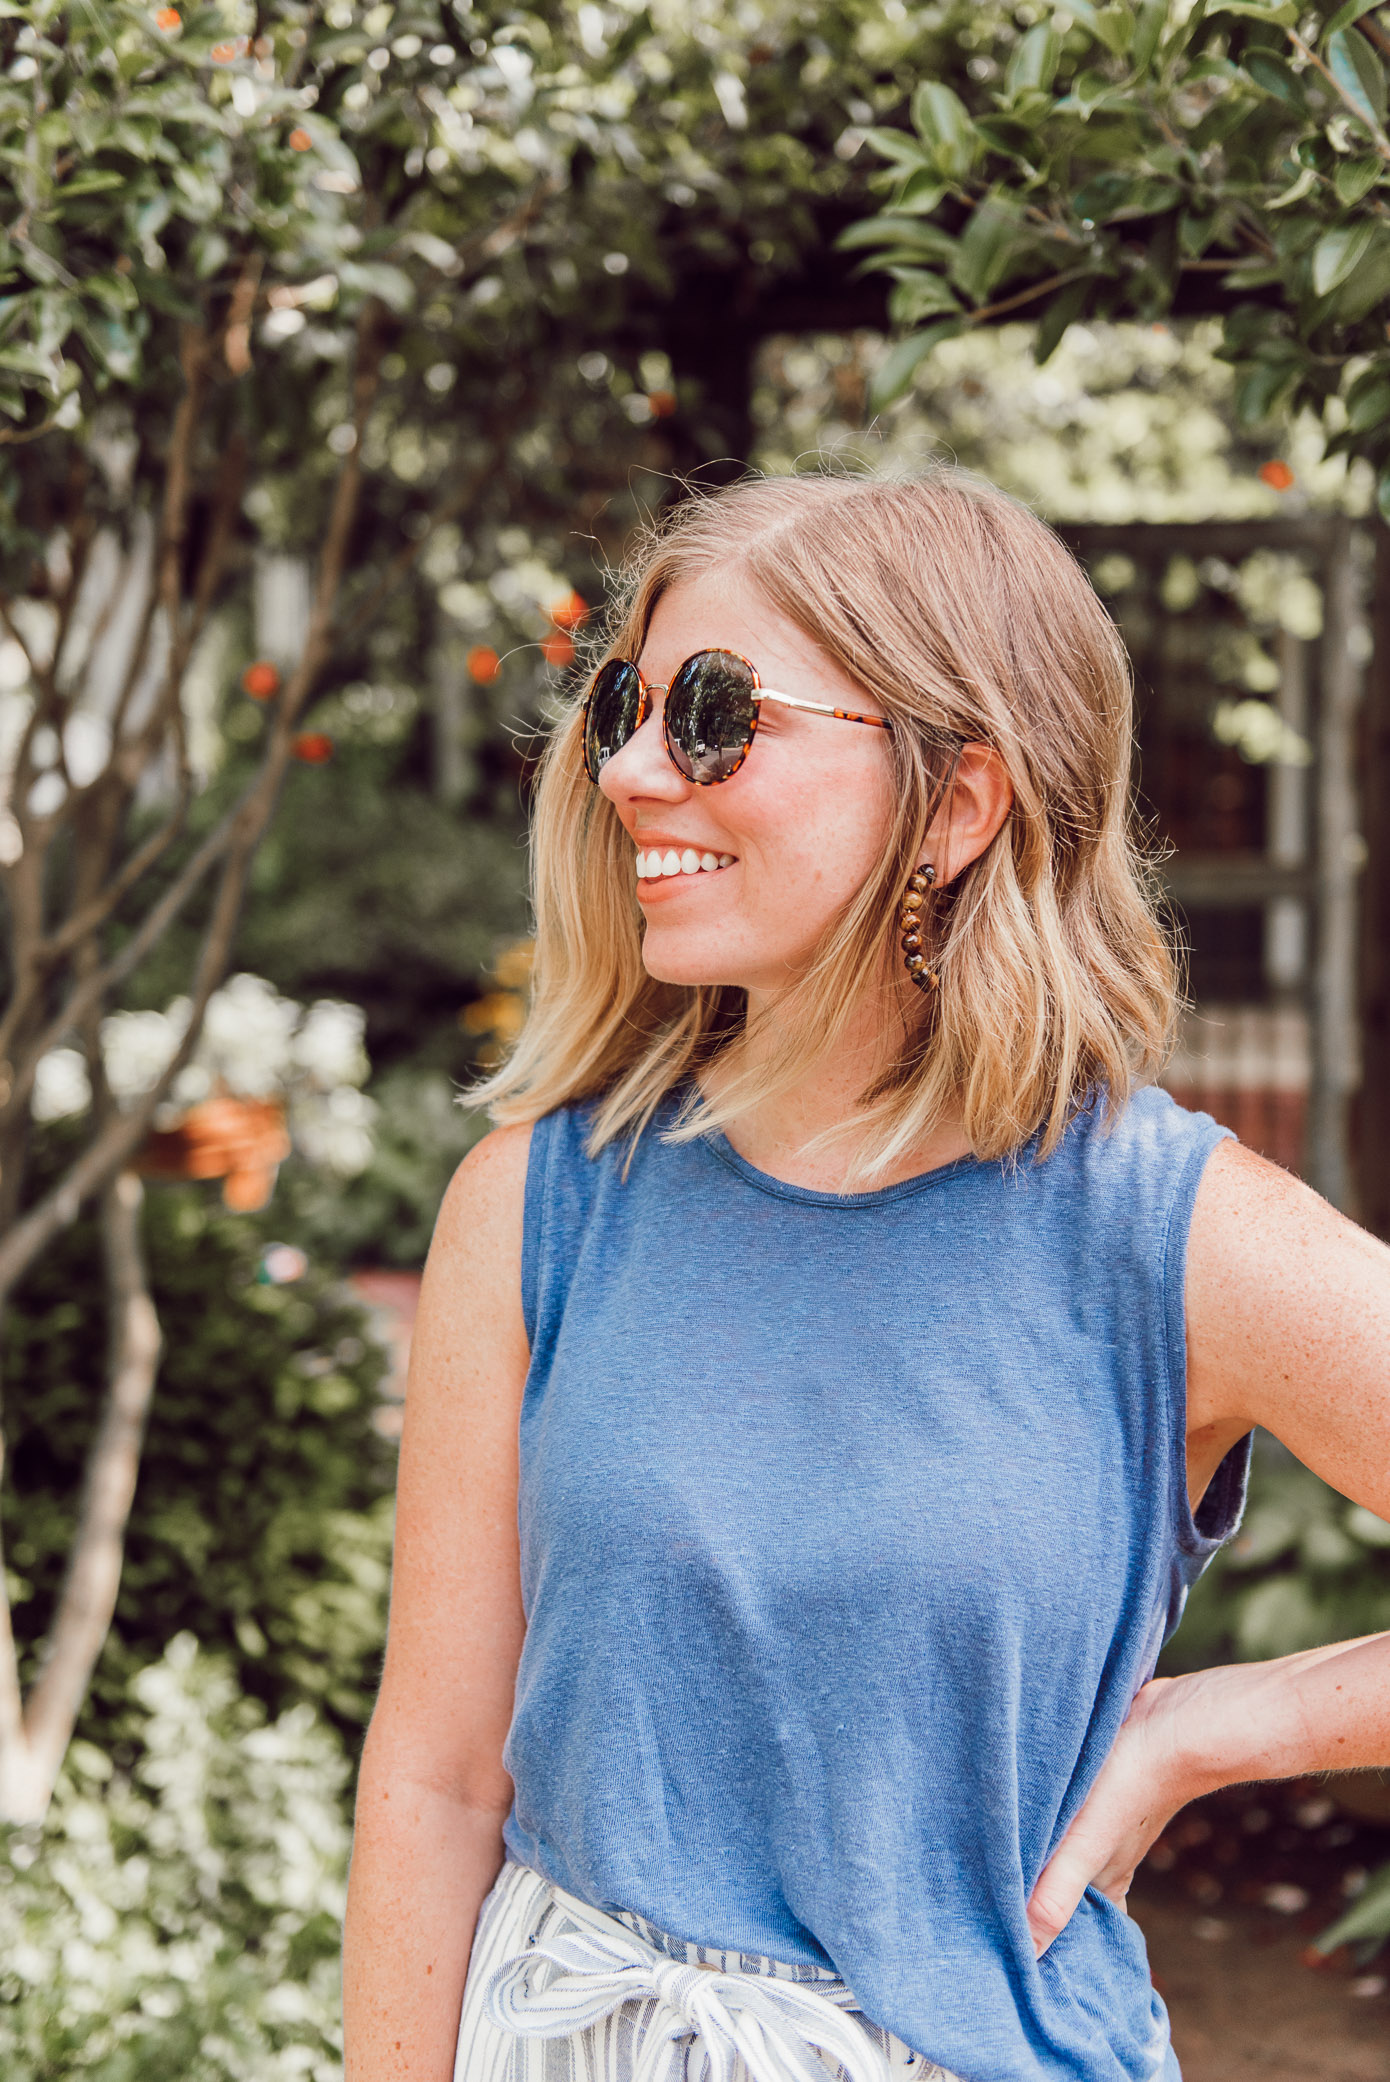 Ray-Ban Icons Retro Sunglasses Dupes | Round Framed Sunglasses under $20 | Louella Reese